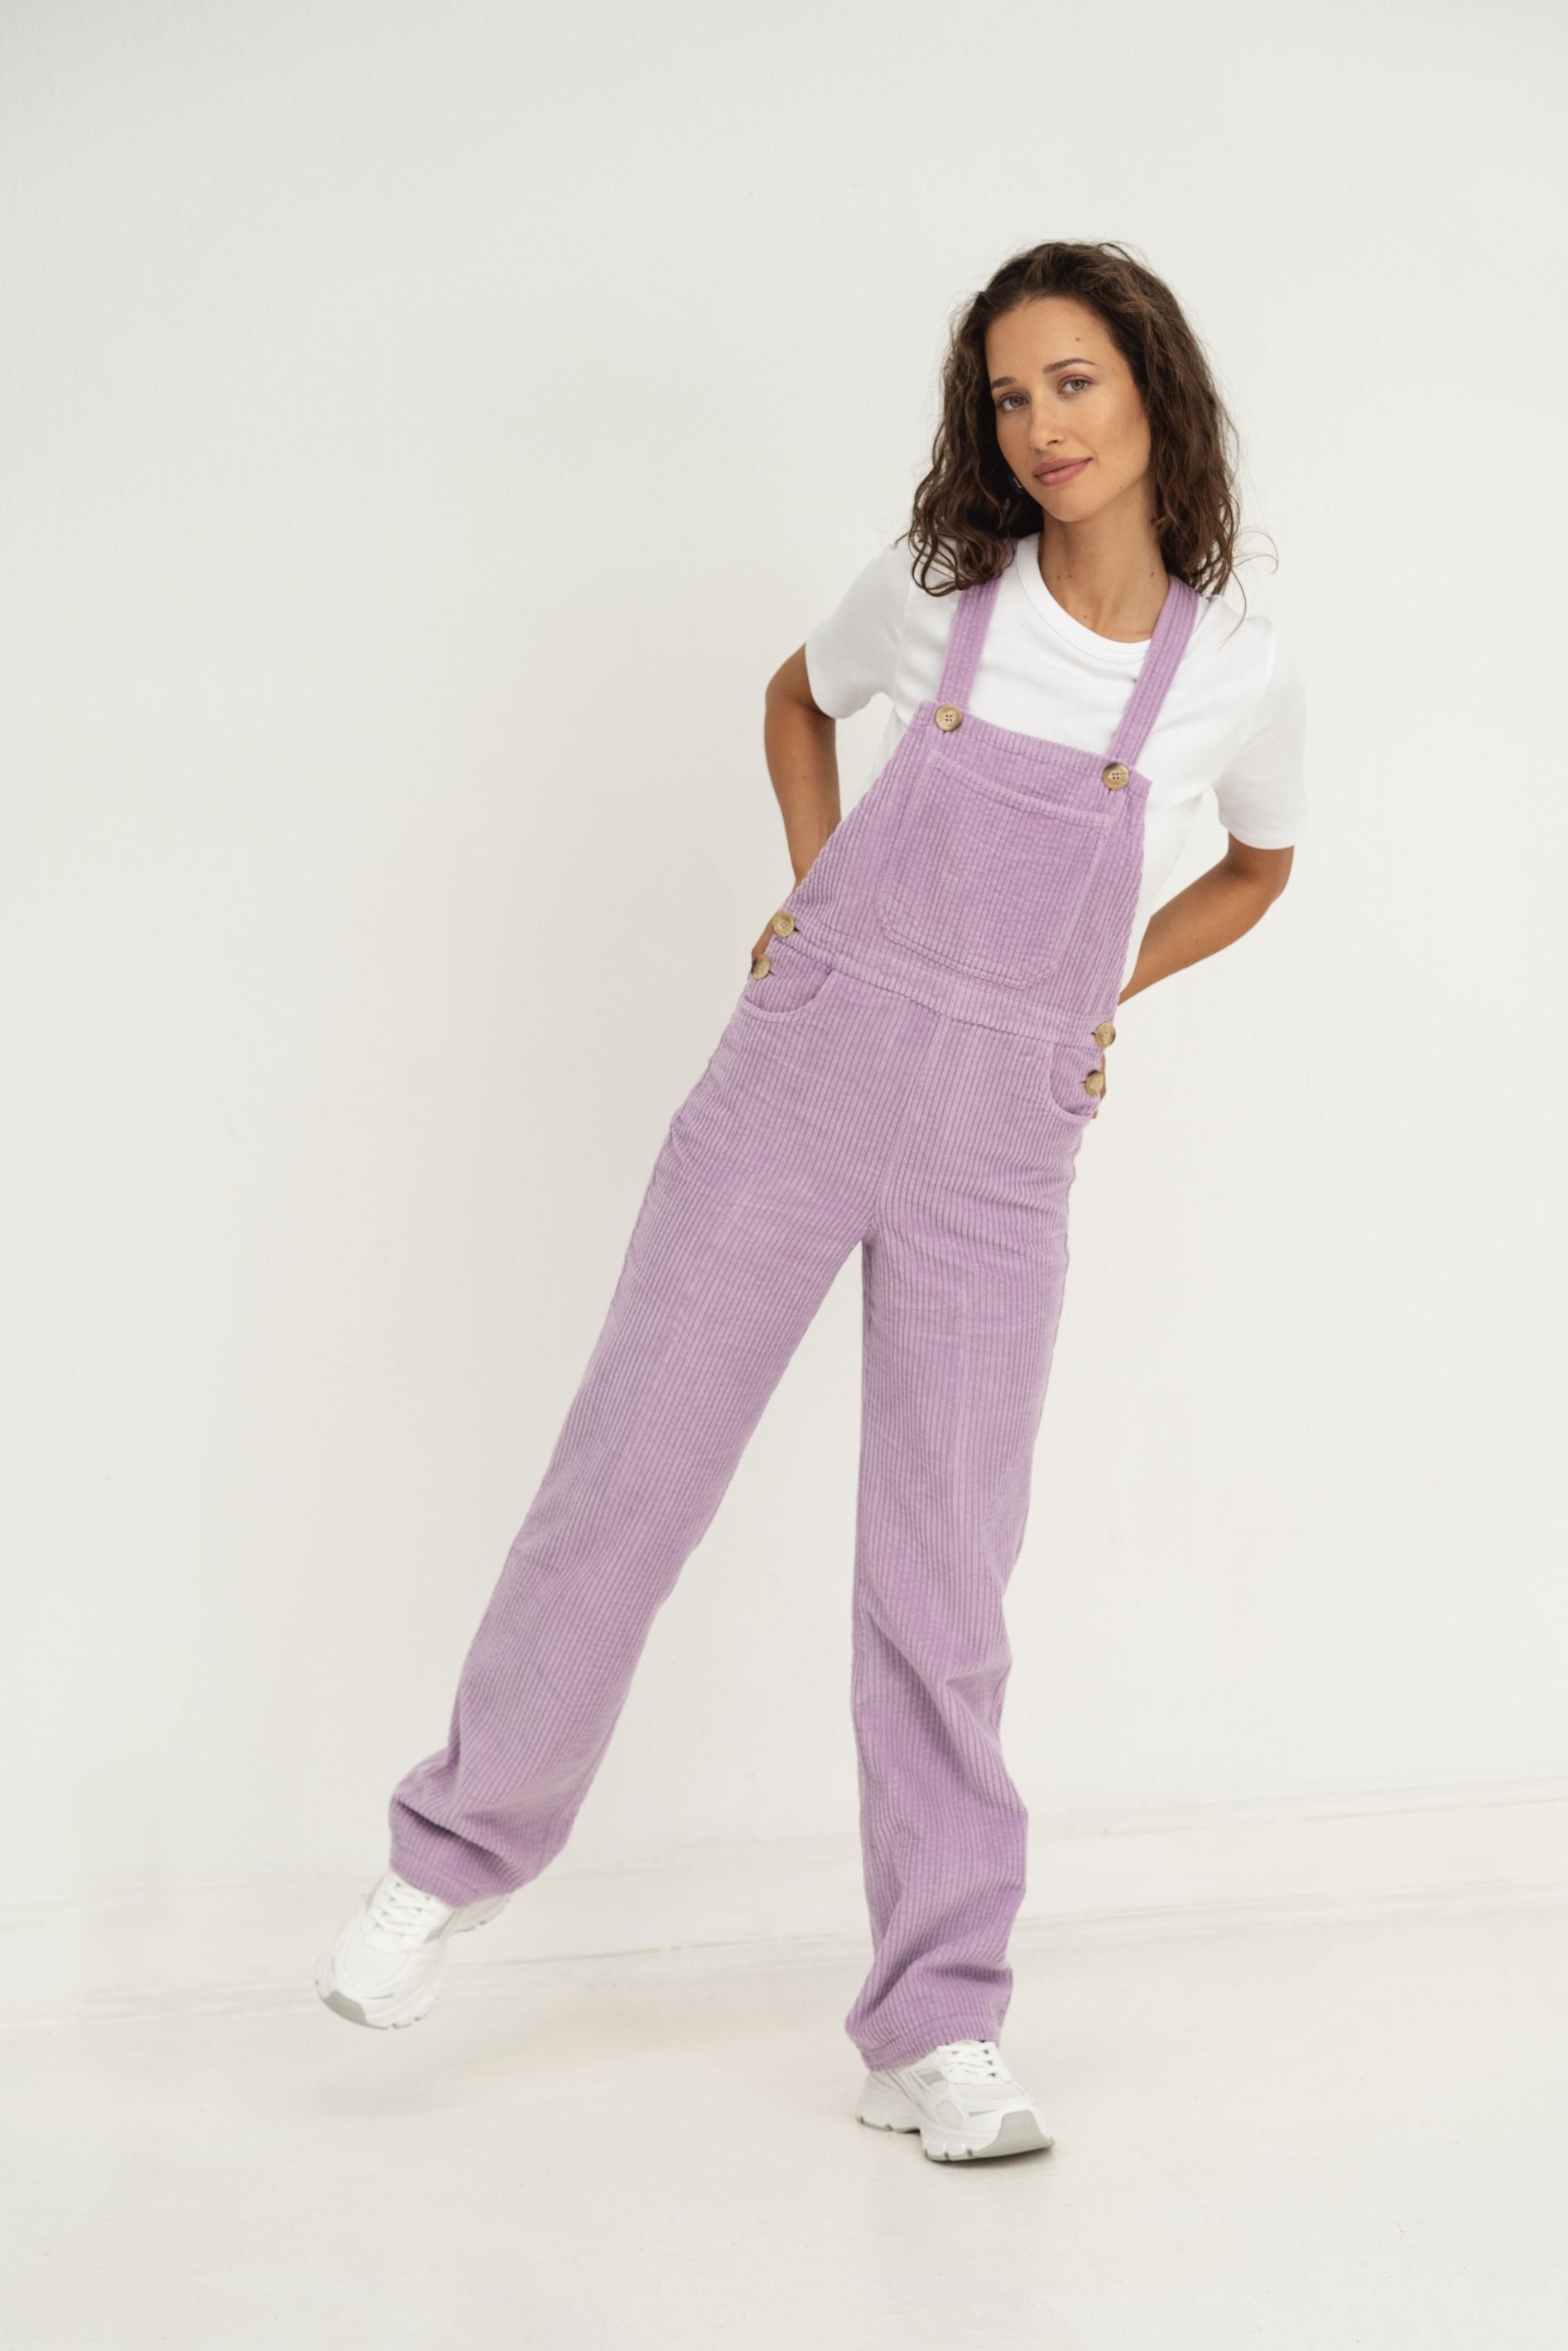 Naz women's corduroy overalls in lilac. Made in Portugal.